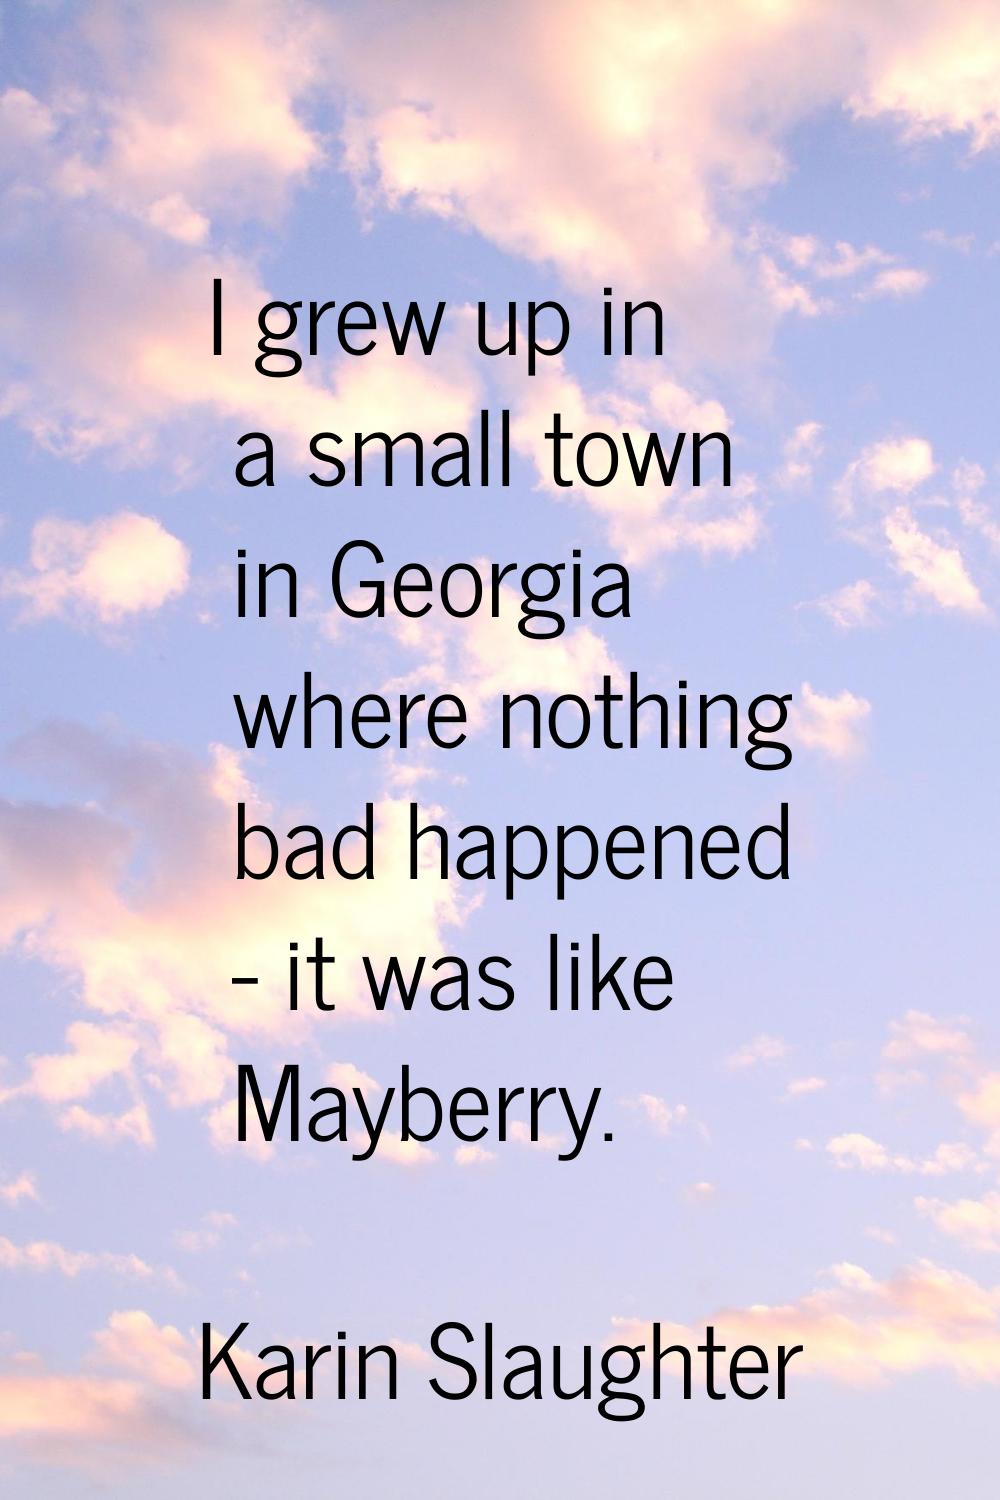 I grew up in a small town in Georgia where nothing bad happened - it was like Mayberry.